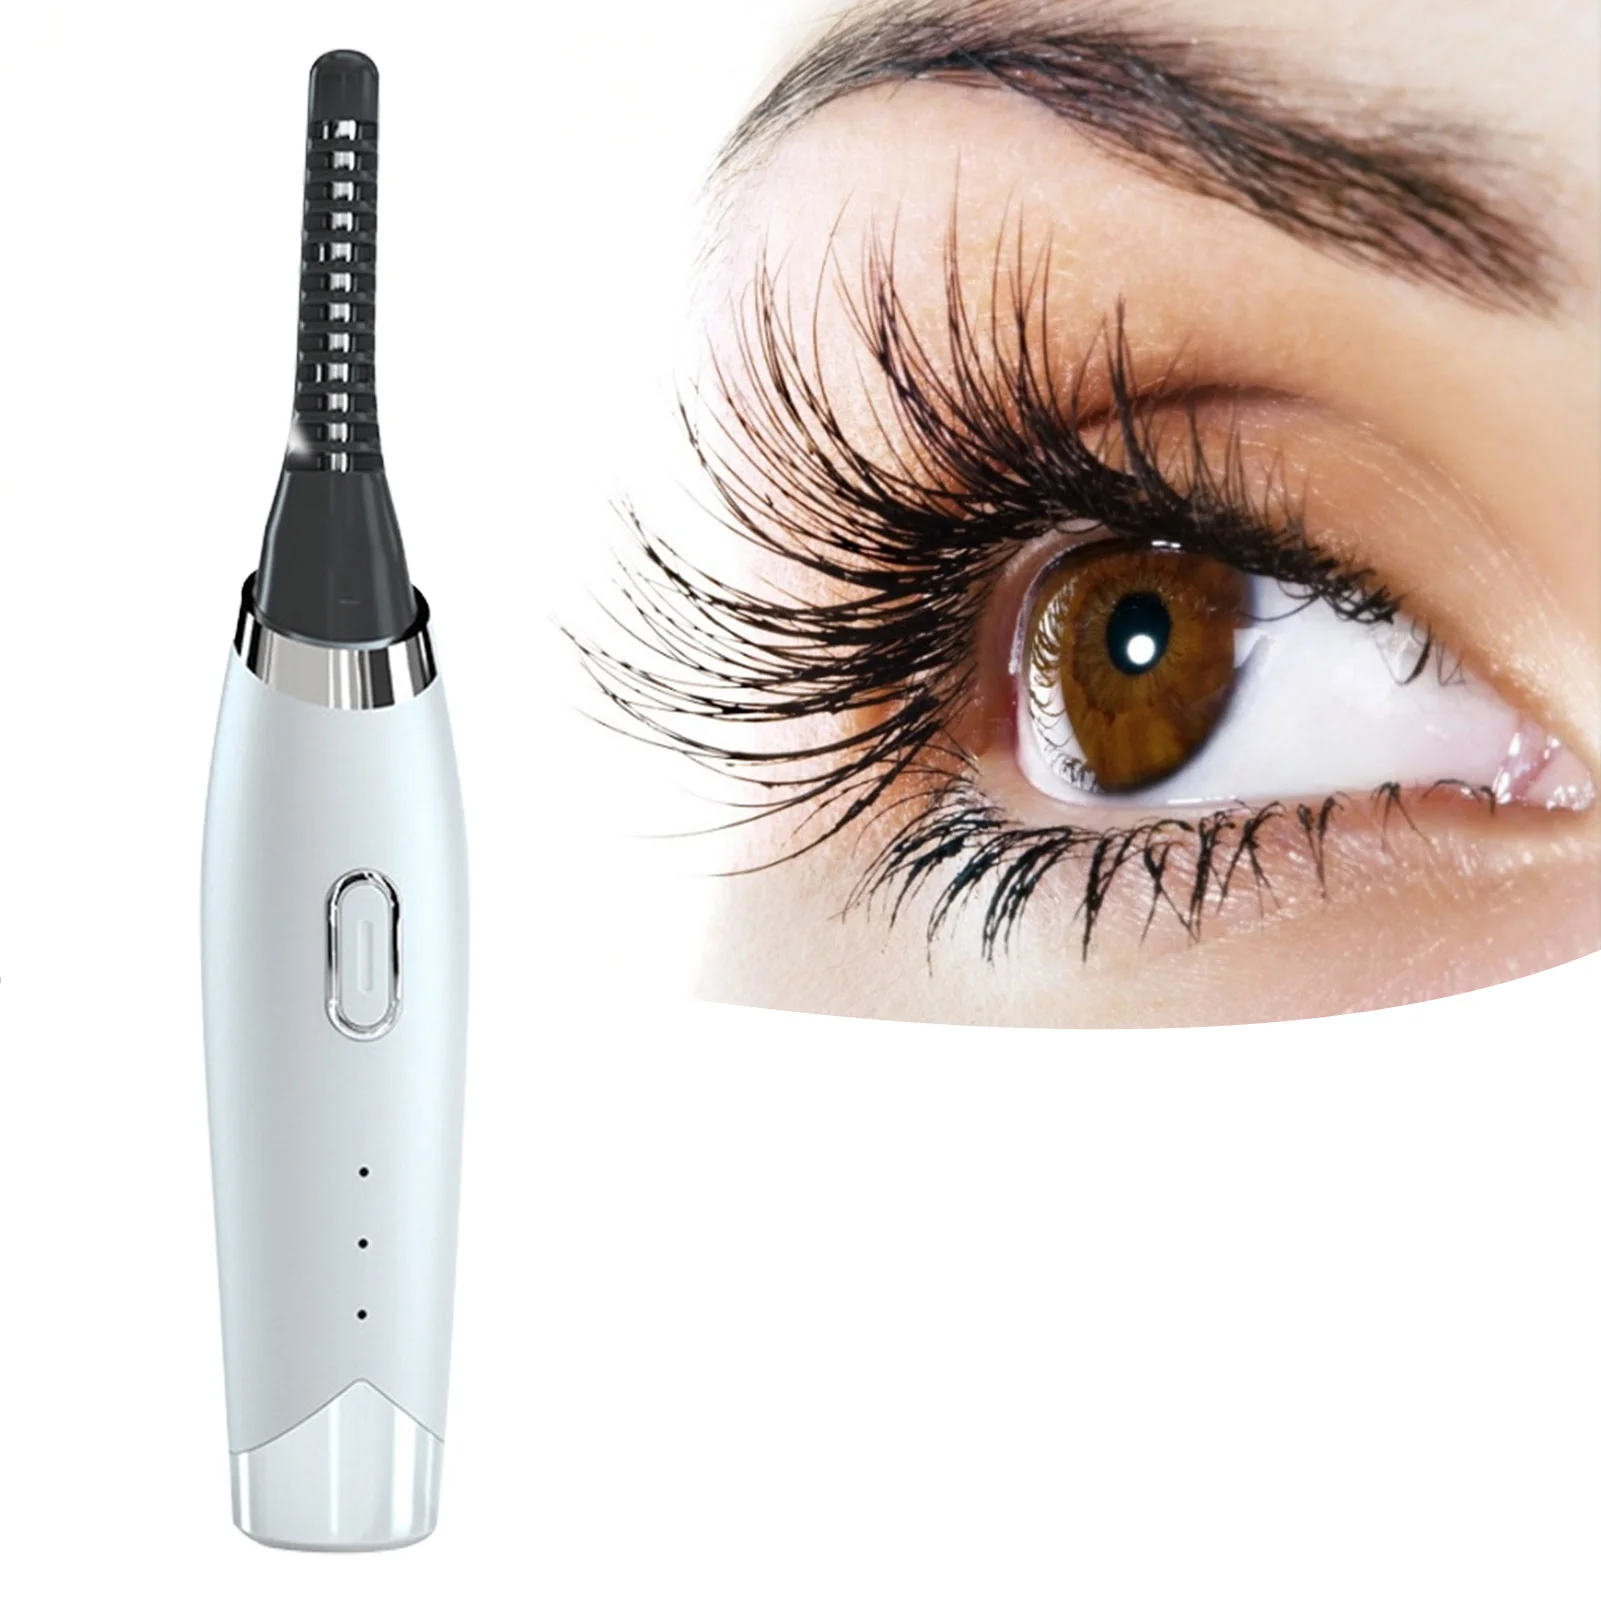 

Electric Eyelash Curler Portable Heated Eyelash Curler Electric Eyelash Curler Heated Eye Lashes Curlers Eyelashes Curl Tool For